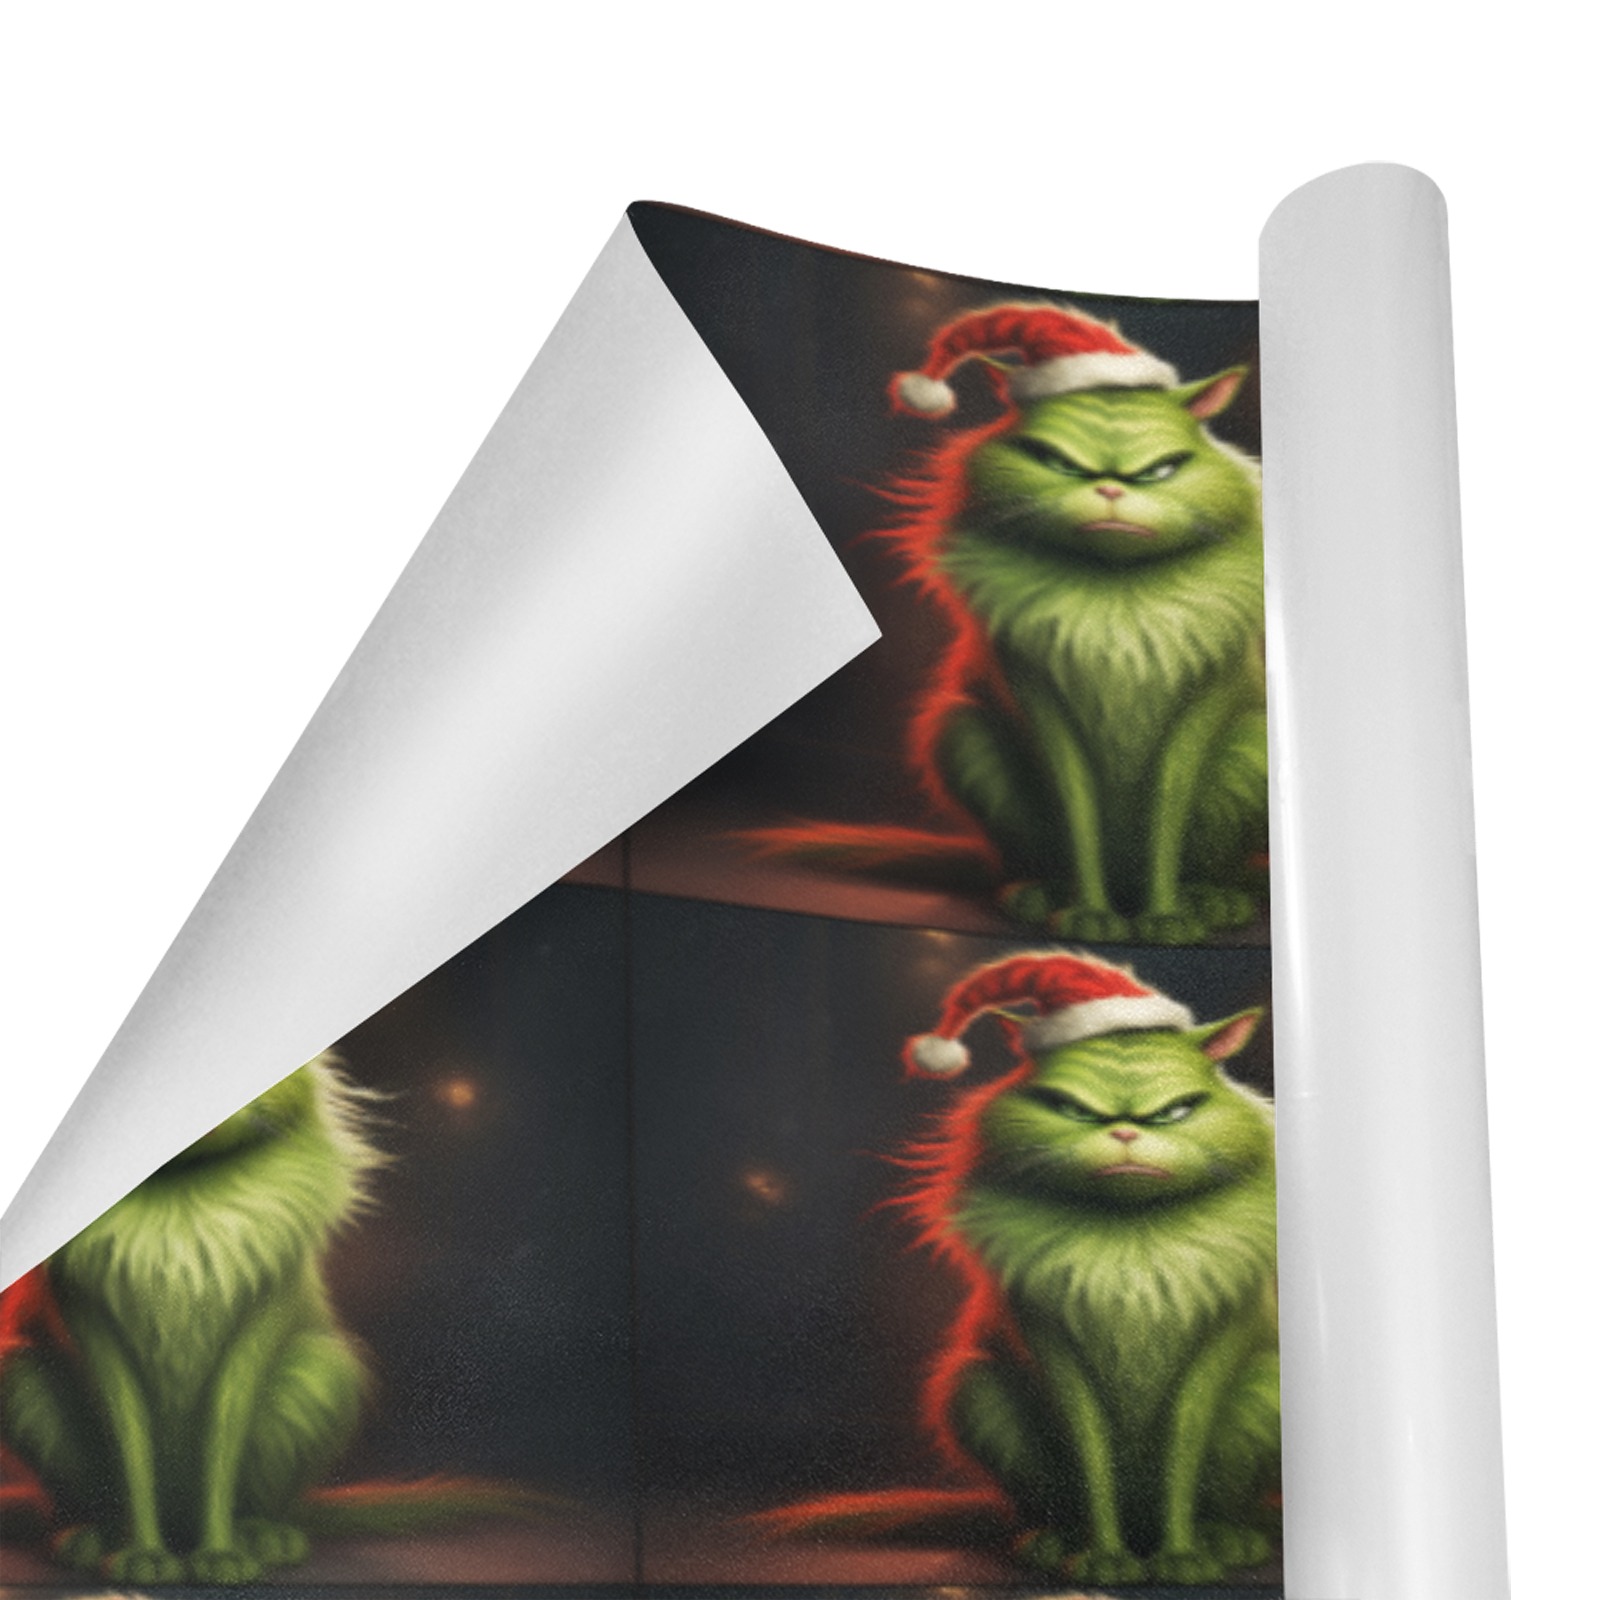 Unmarry Christmas Grinch Cat Gift Wrapping Paper 58"x 23" (2 Rolls)